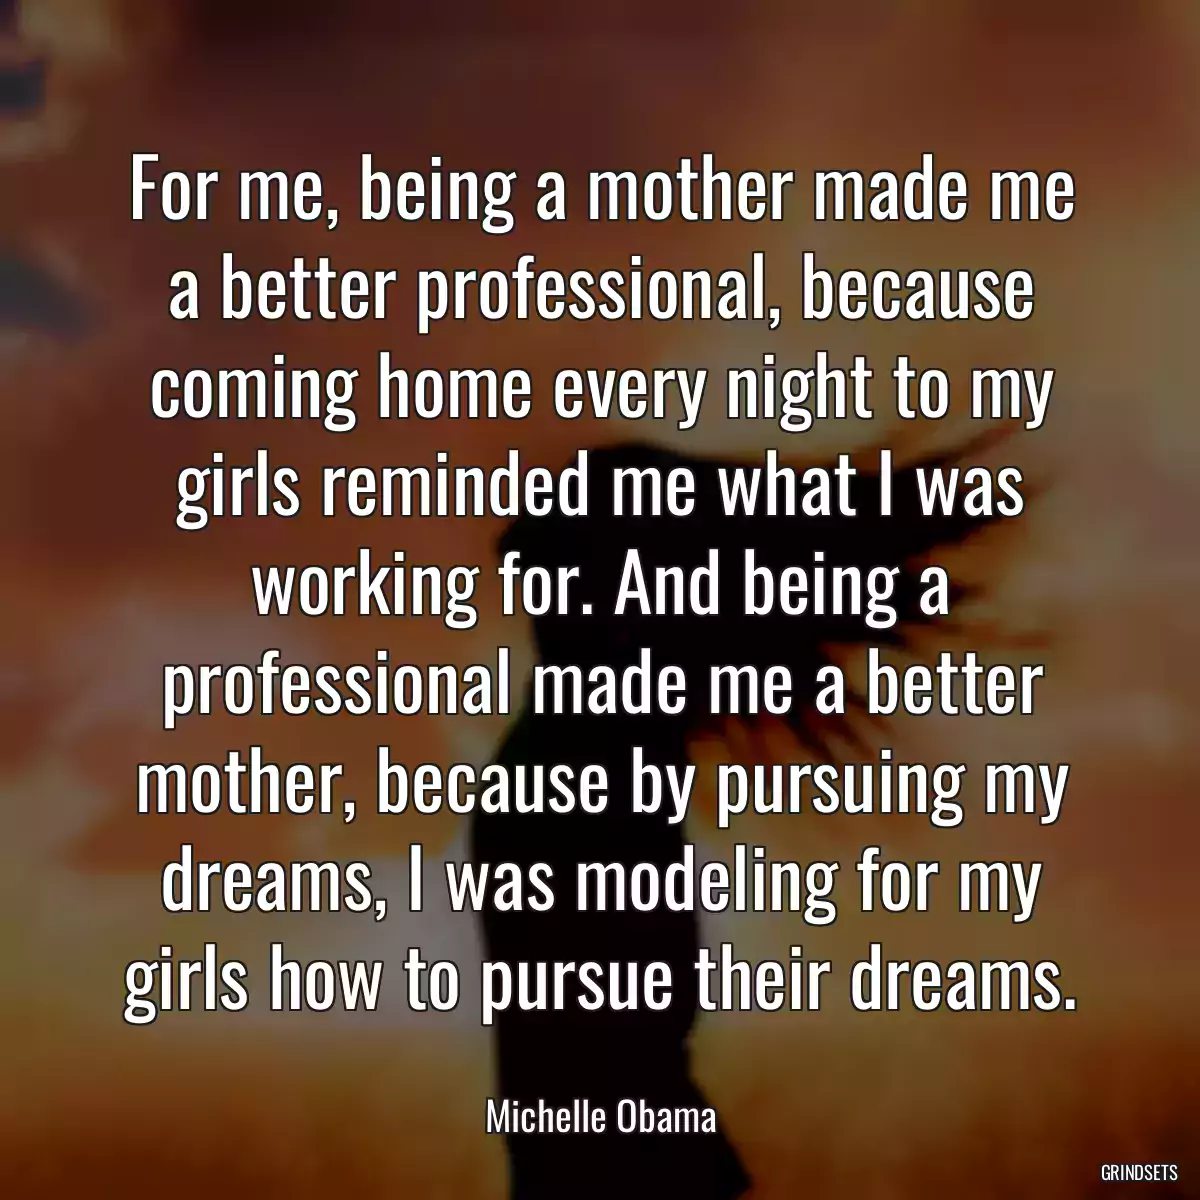 For me, being a mother made me a better professional, because coming home every night to my girls reminded me what I was working for. And being a professional made me a better mother, because by pursuing my dreams, I was modeling for my girls how to pursue their dreams.